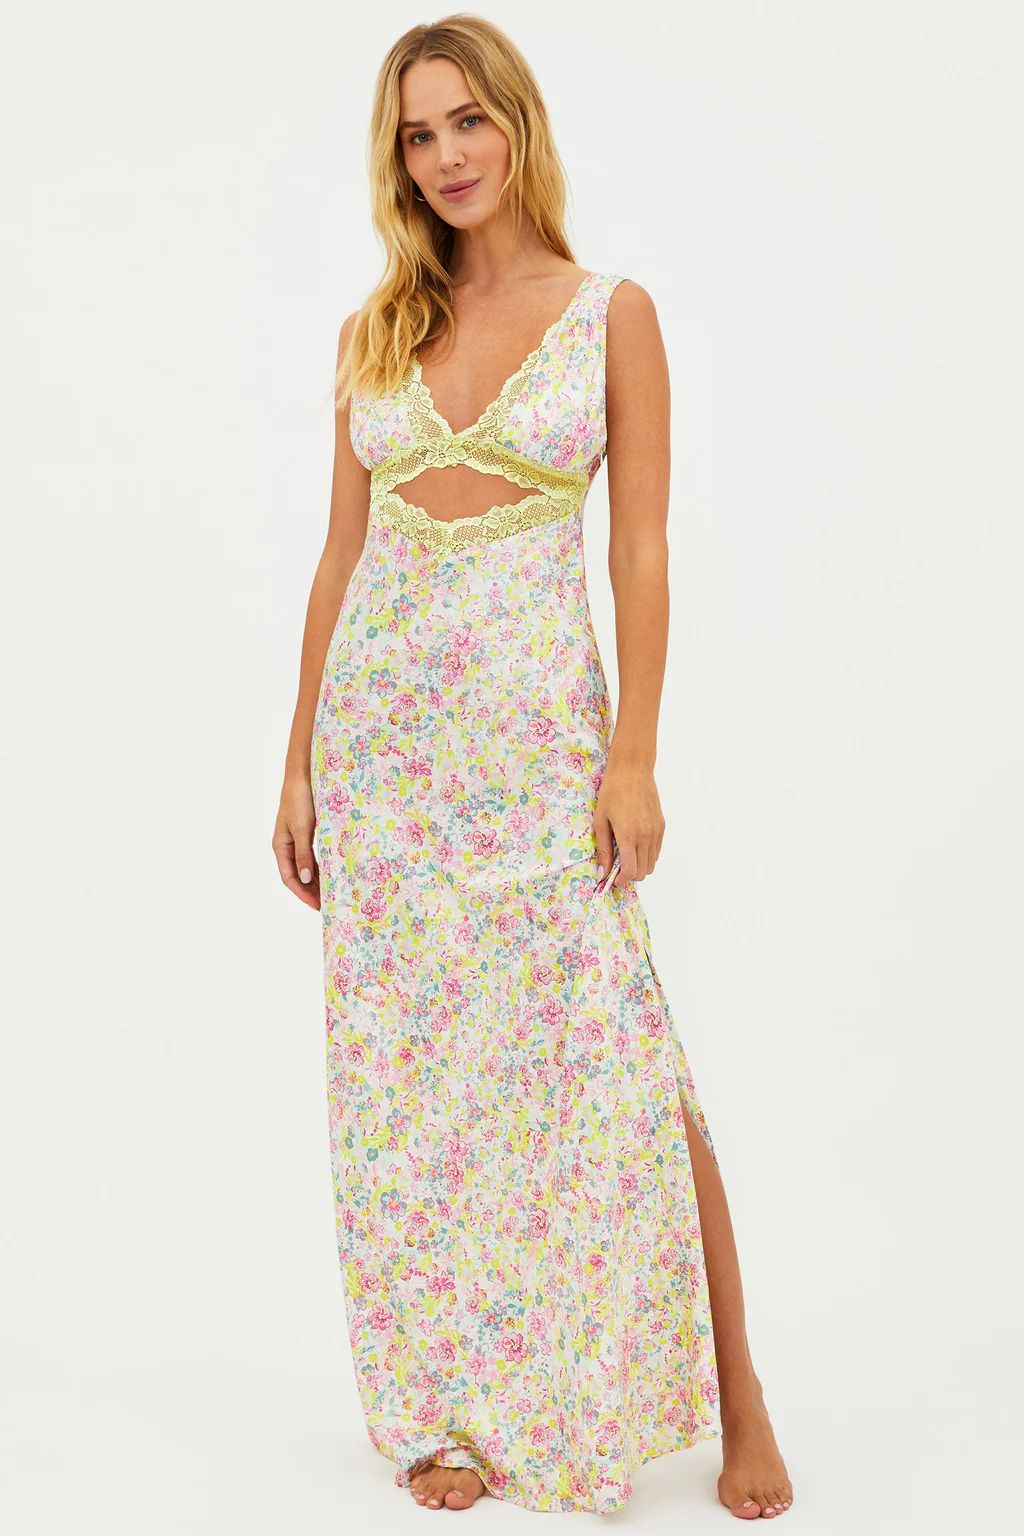 Kimi Dress Forget Me Not Floral | Beach Riot